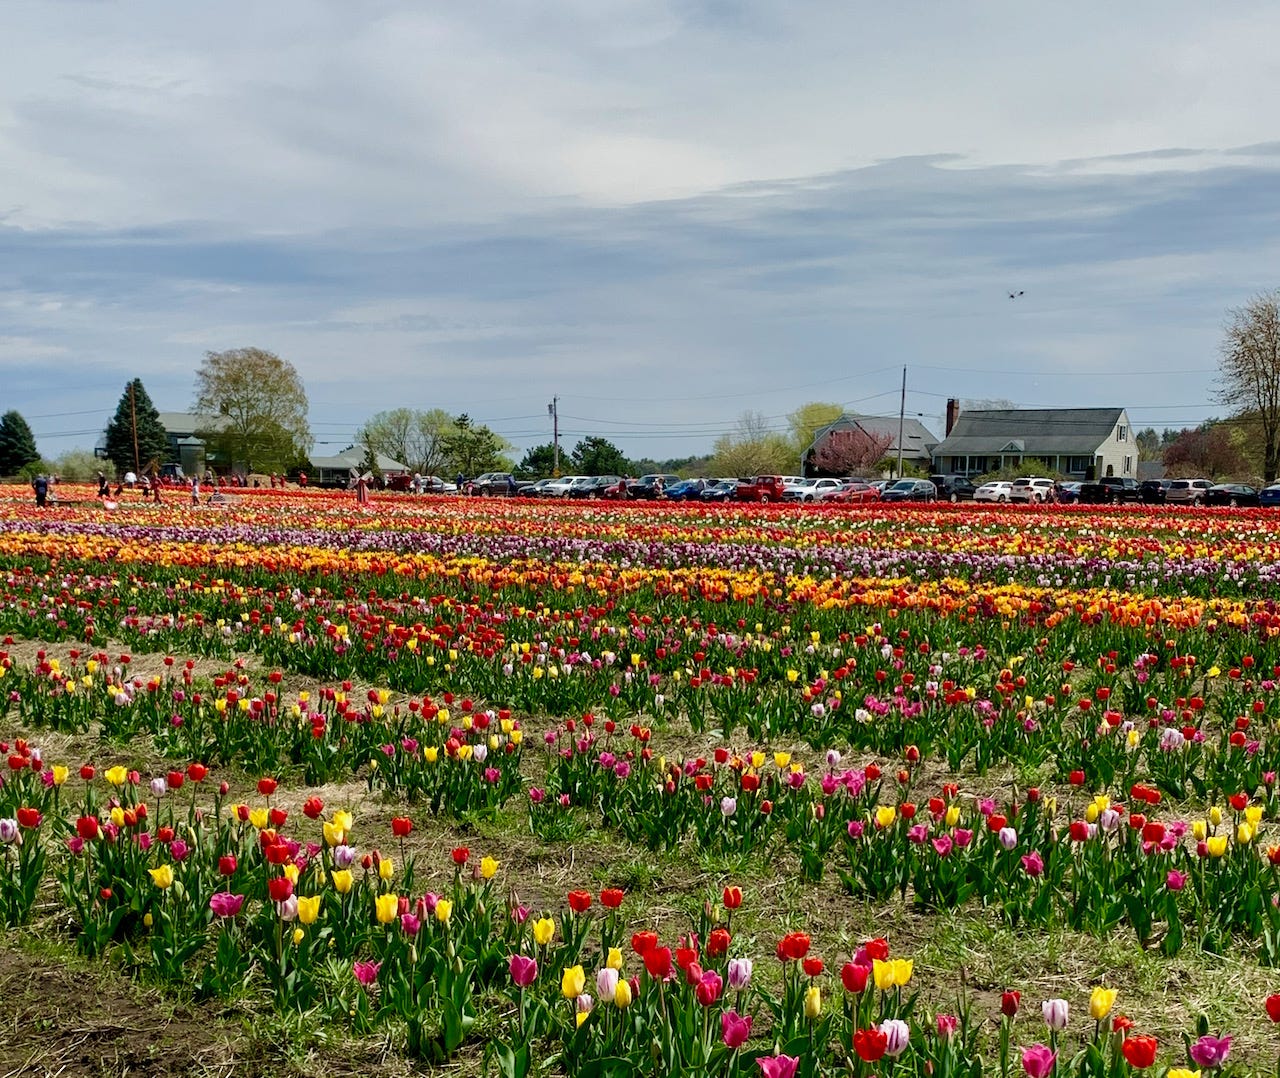 rows of red yellow purple tulips. In the midground is the farmhouse and parked cars. above is a cloudy overcast sky